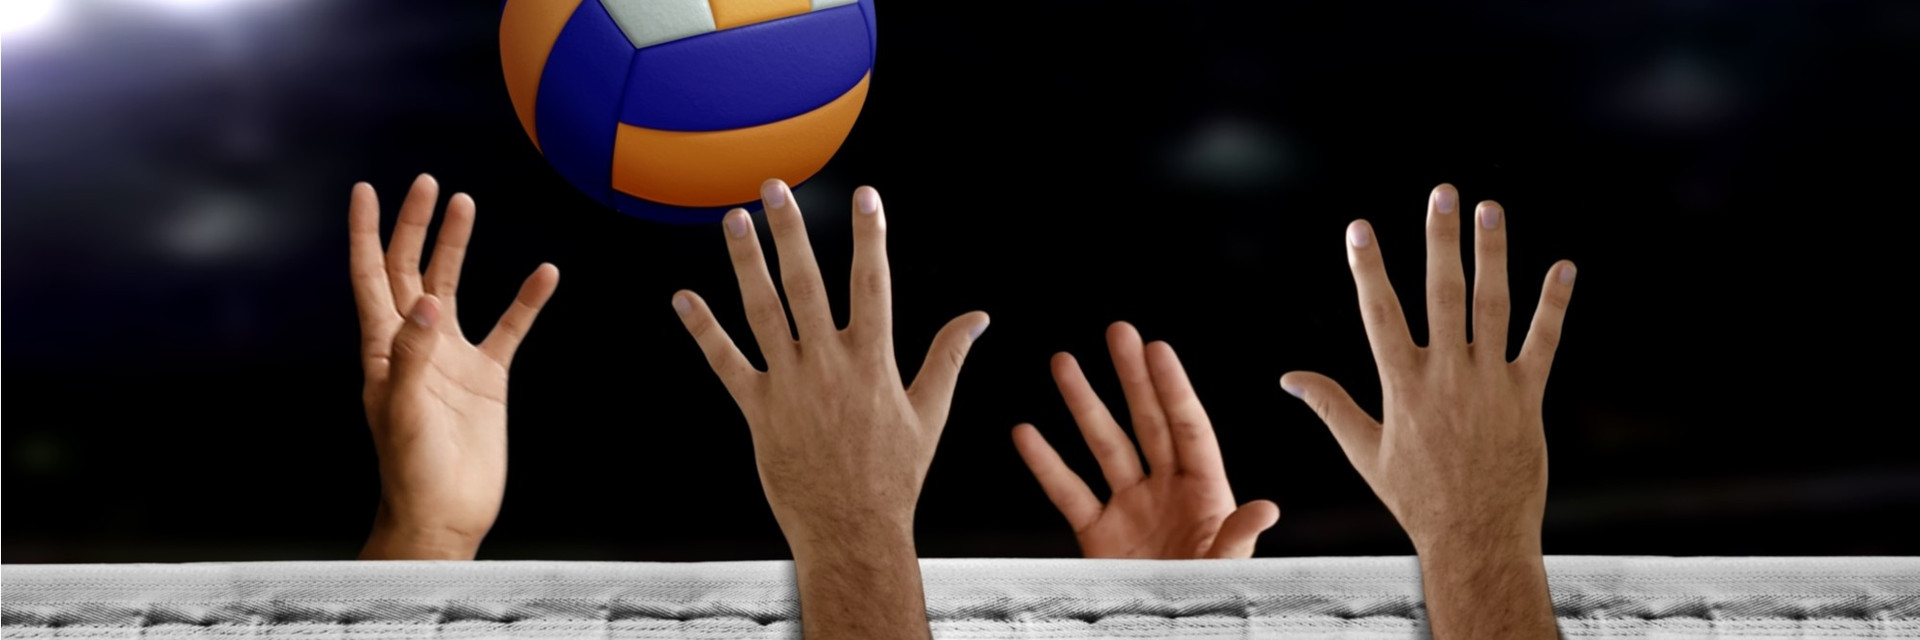 volleyball-injury-prevention-for-high-school-athletes